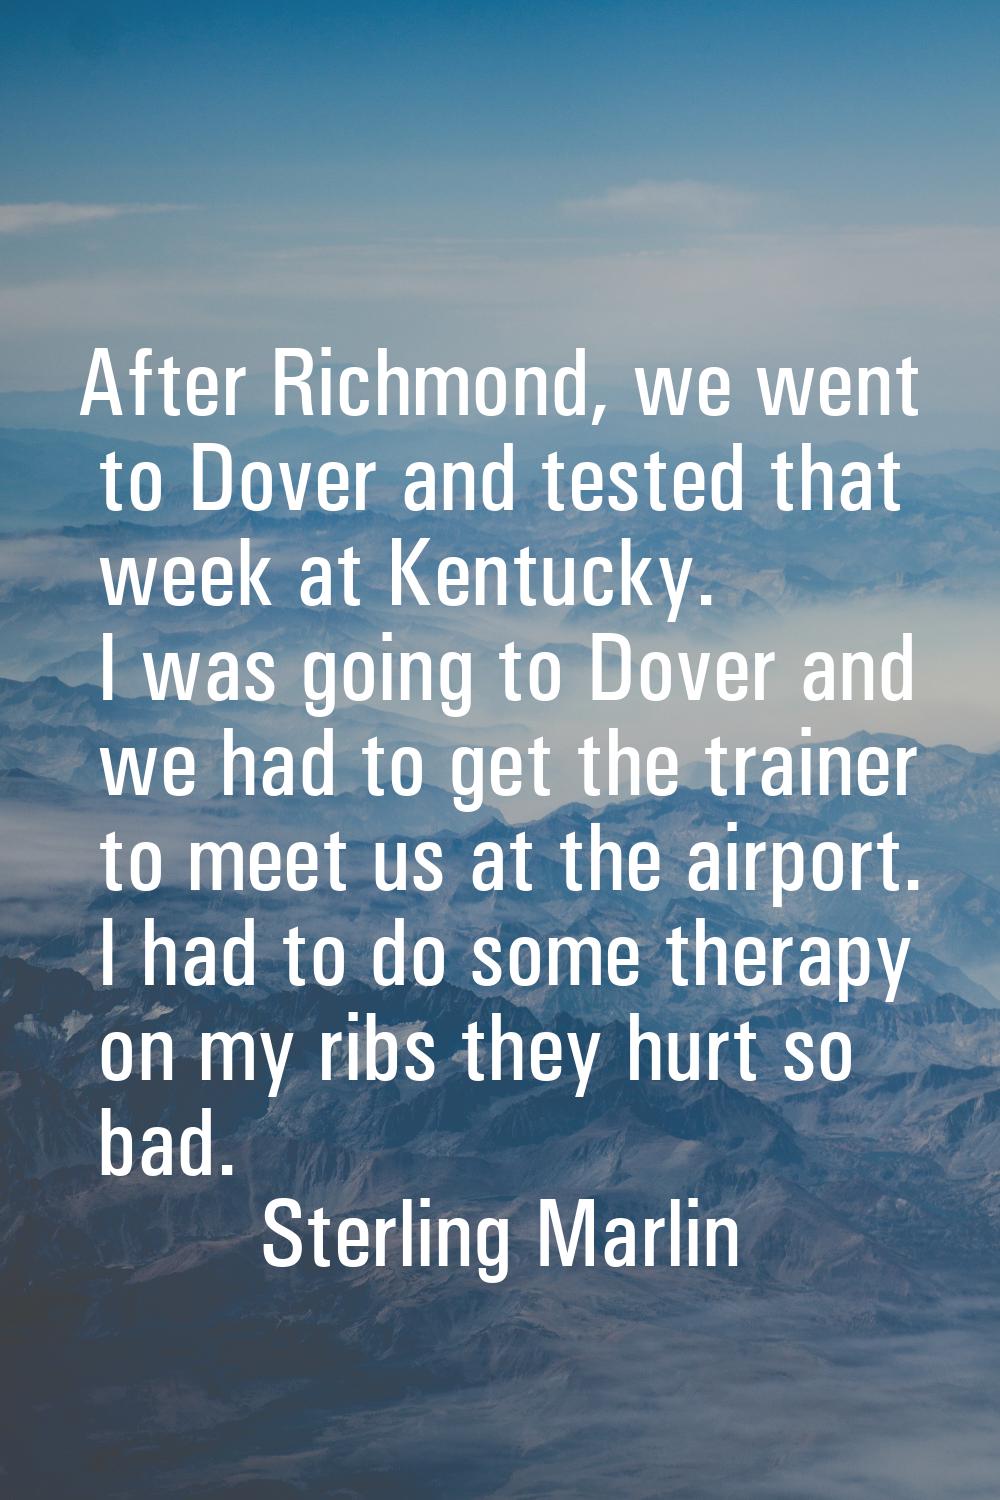 After Richmond, we went to Dover and tested that week at Kentucky. I was going to Dover and we had 